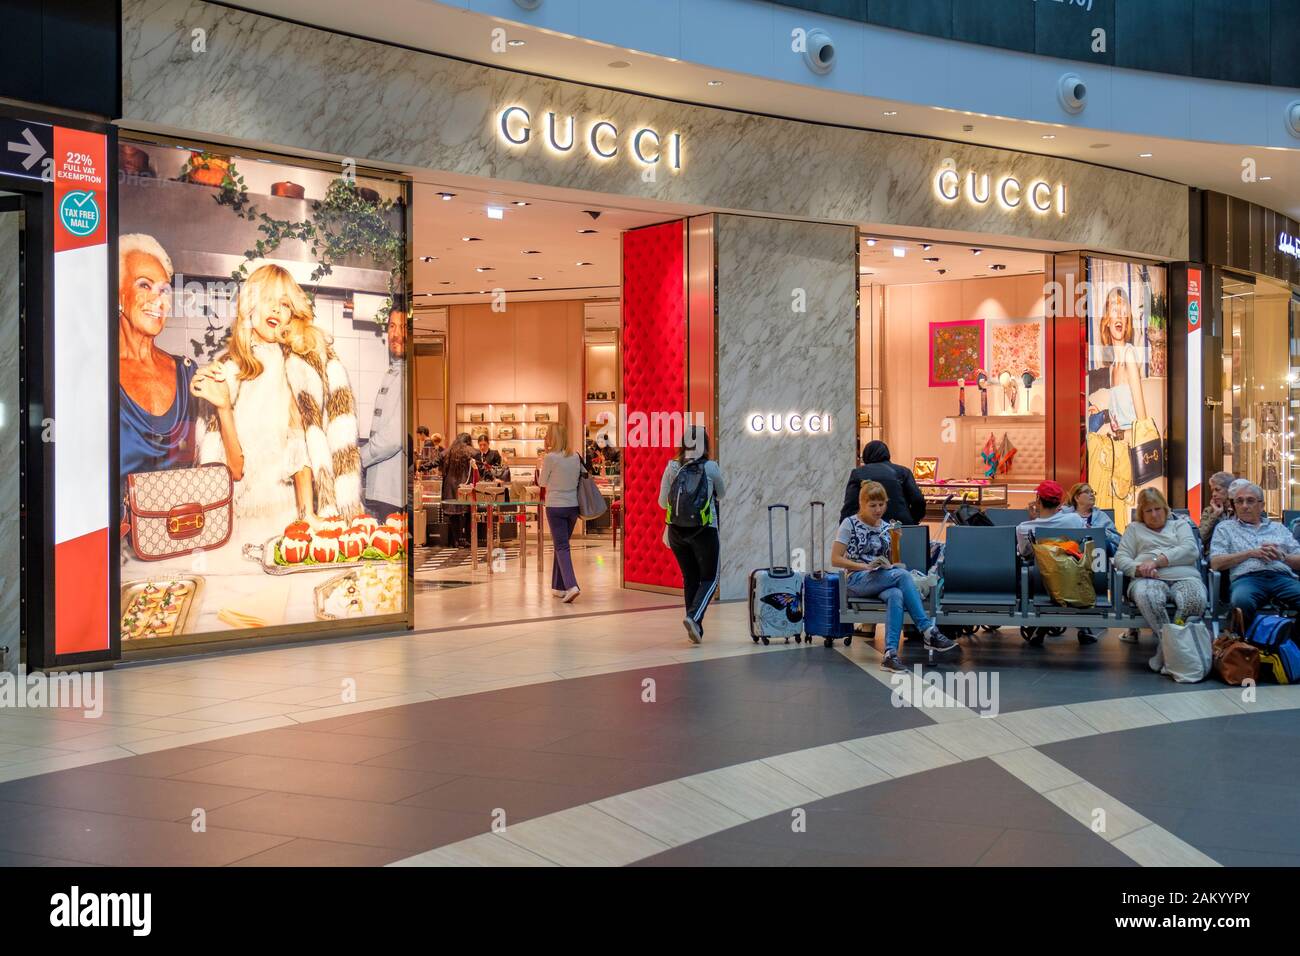 Gucci Gucci High Resolution Stock Photography -